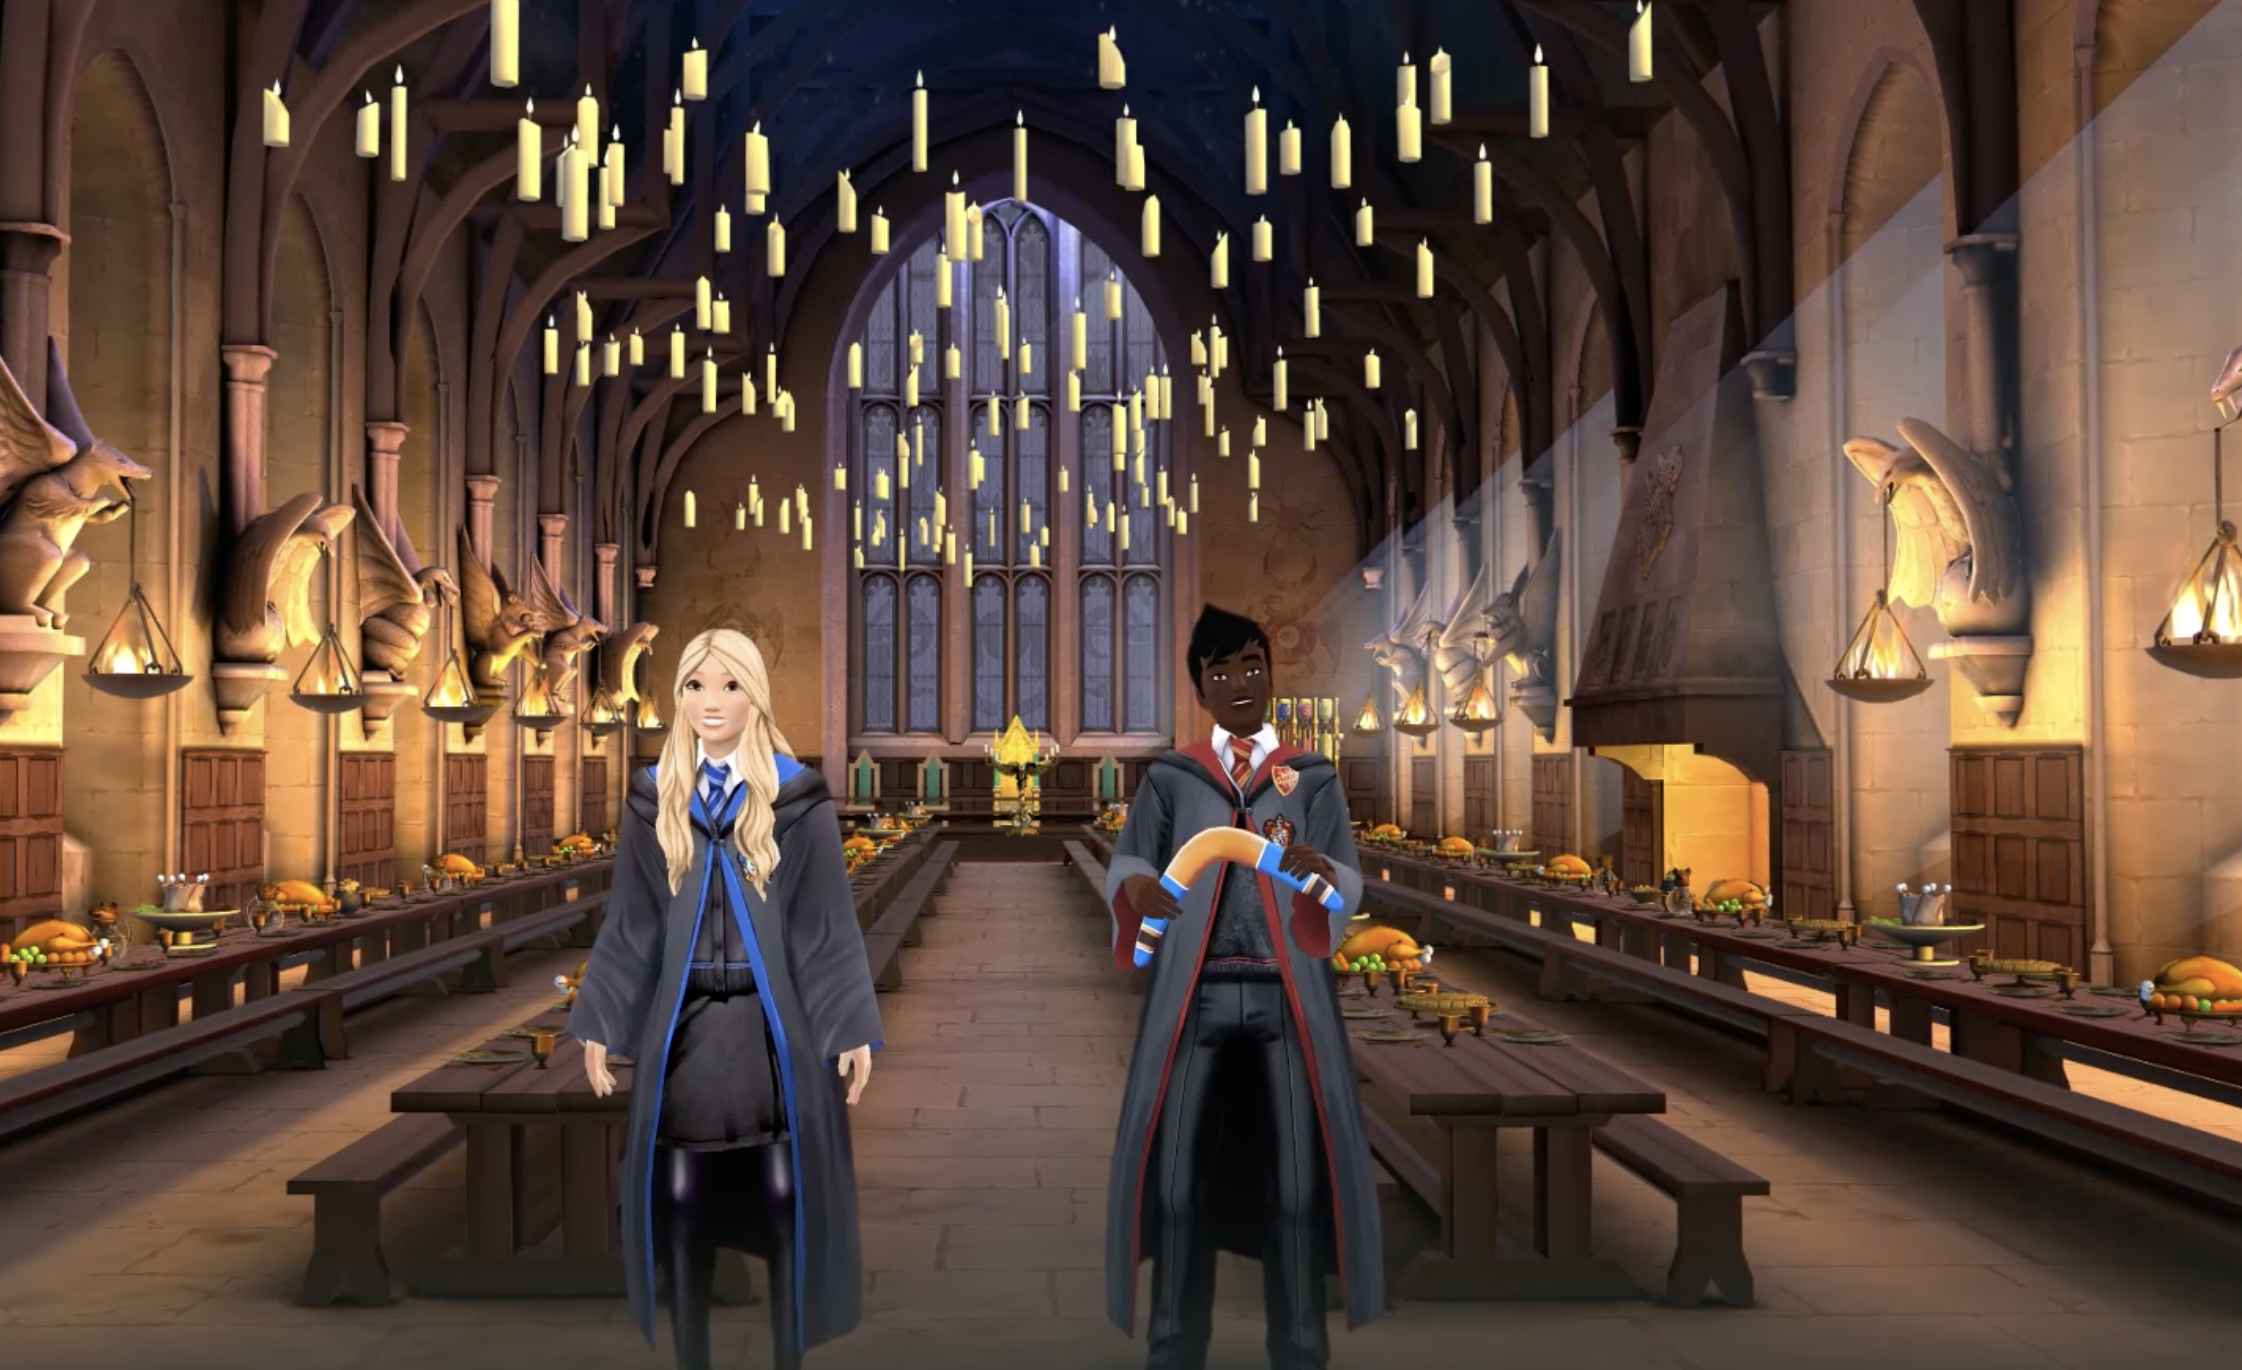 JAM CITY'S HARRY POTTER: HOGWARTS MYSTERY LAUNCHES LARGEST EXPANSION TO  DATE IN MAGICAL NEW ADVENTURE, BEYOND HOGWARTS - Jam City